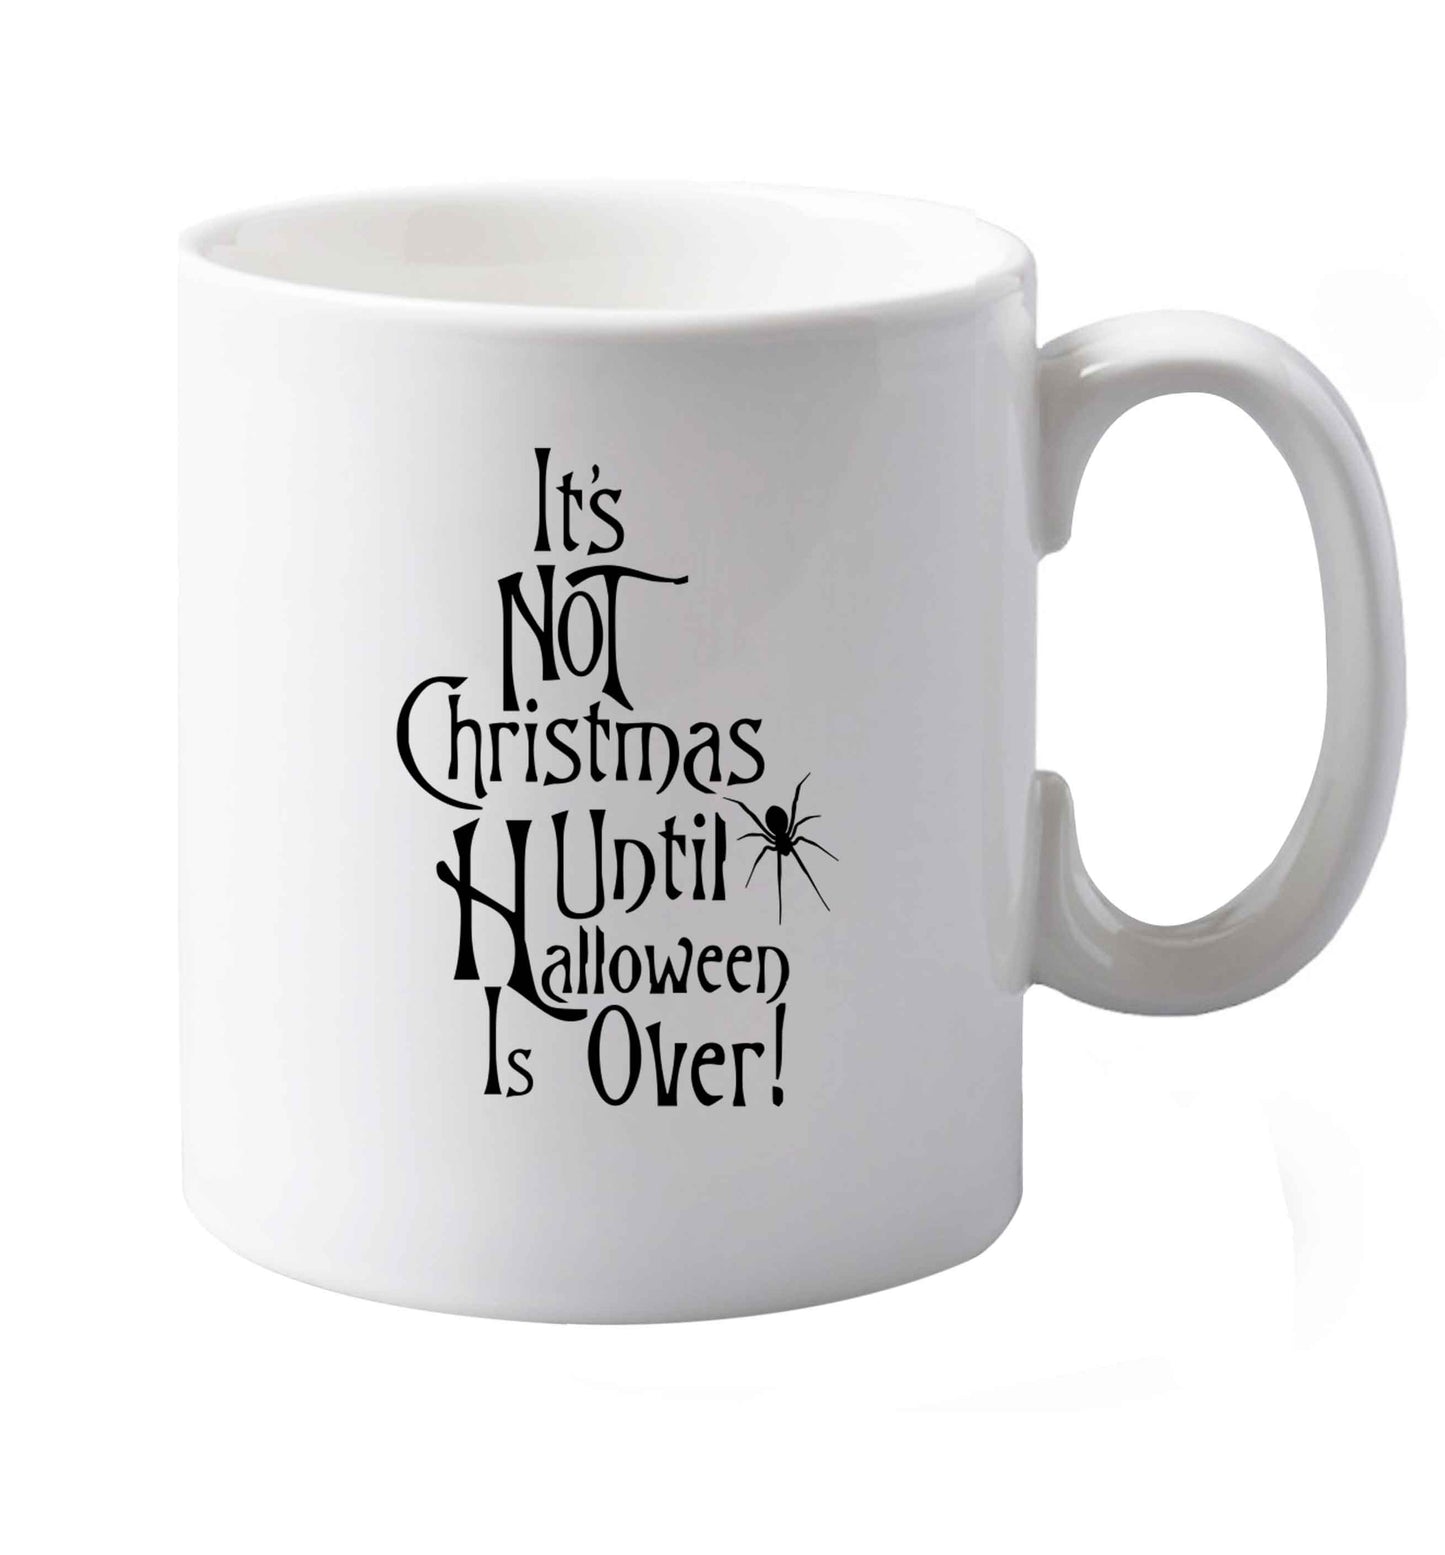 10 oz It's not Christmas until Halloween is over ceramic mug both sides